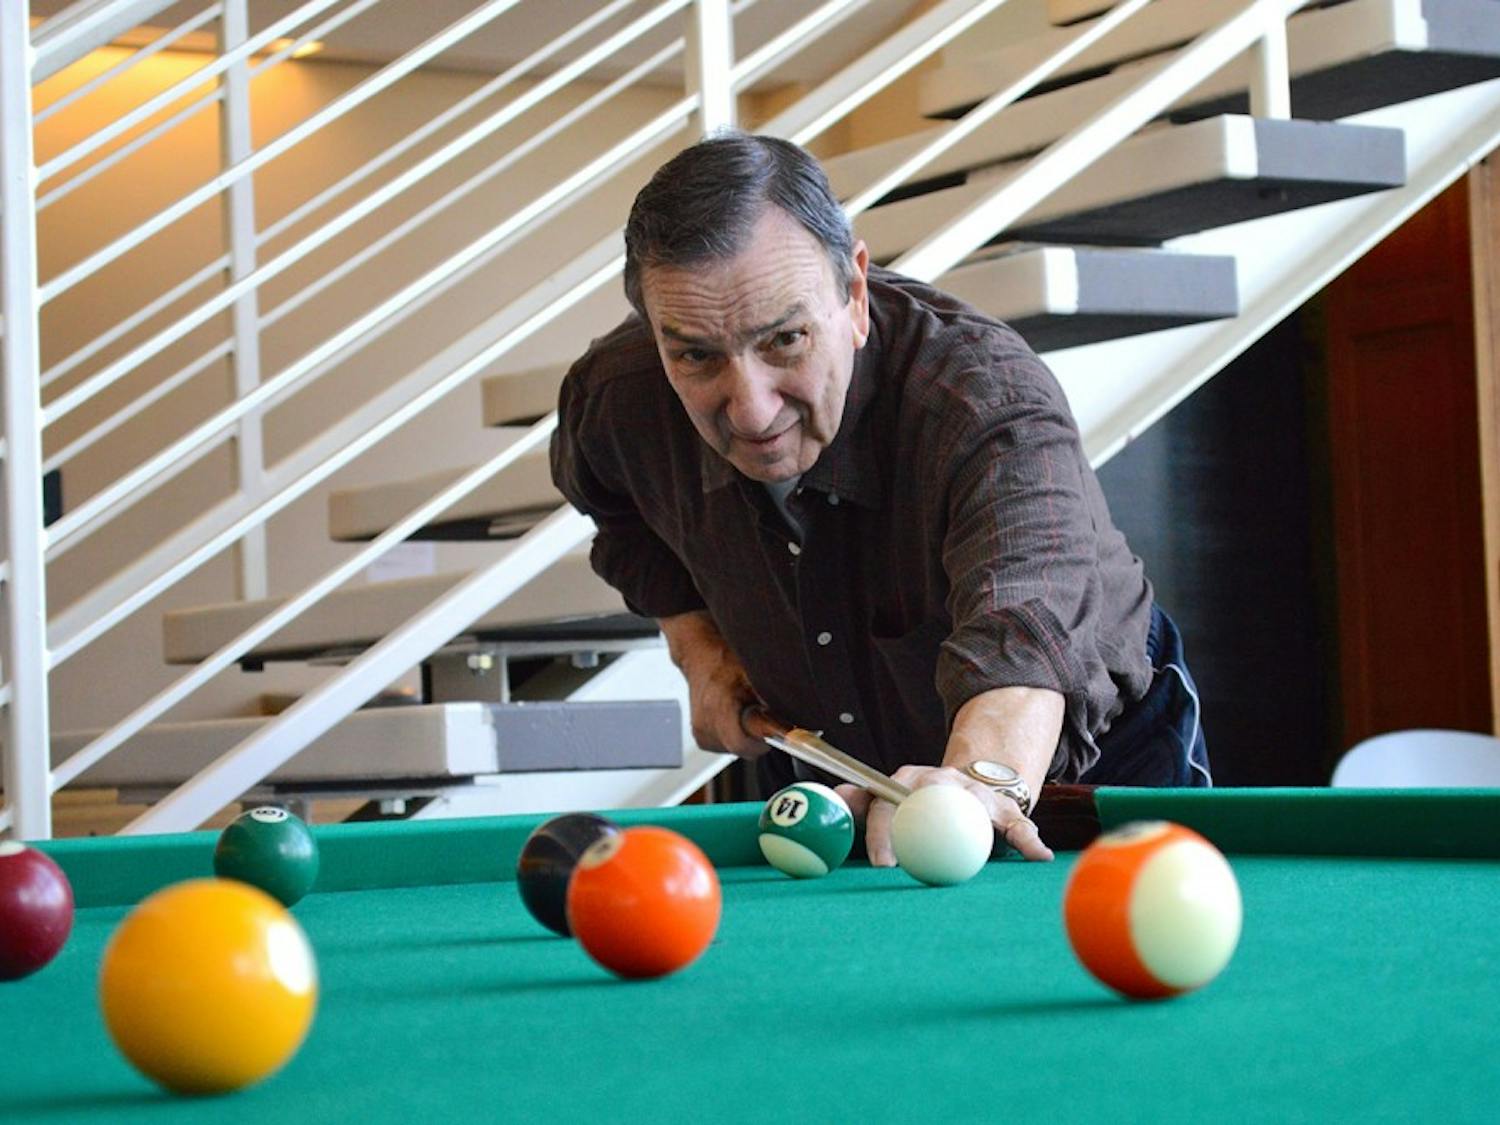 Orange County senior Joe Acciarito shoots pool at the Robert and Pearl Seymour Center in Chapel Hill, which he visits six times a week.